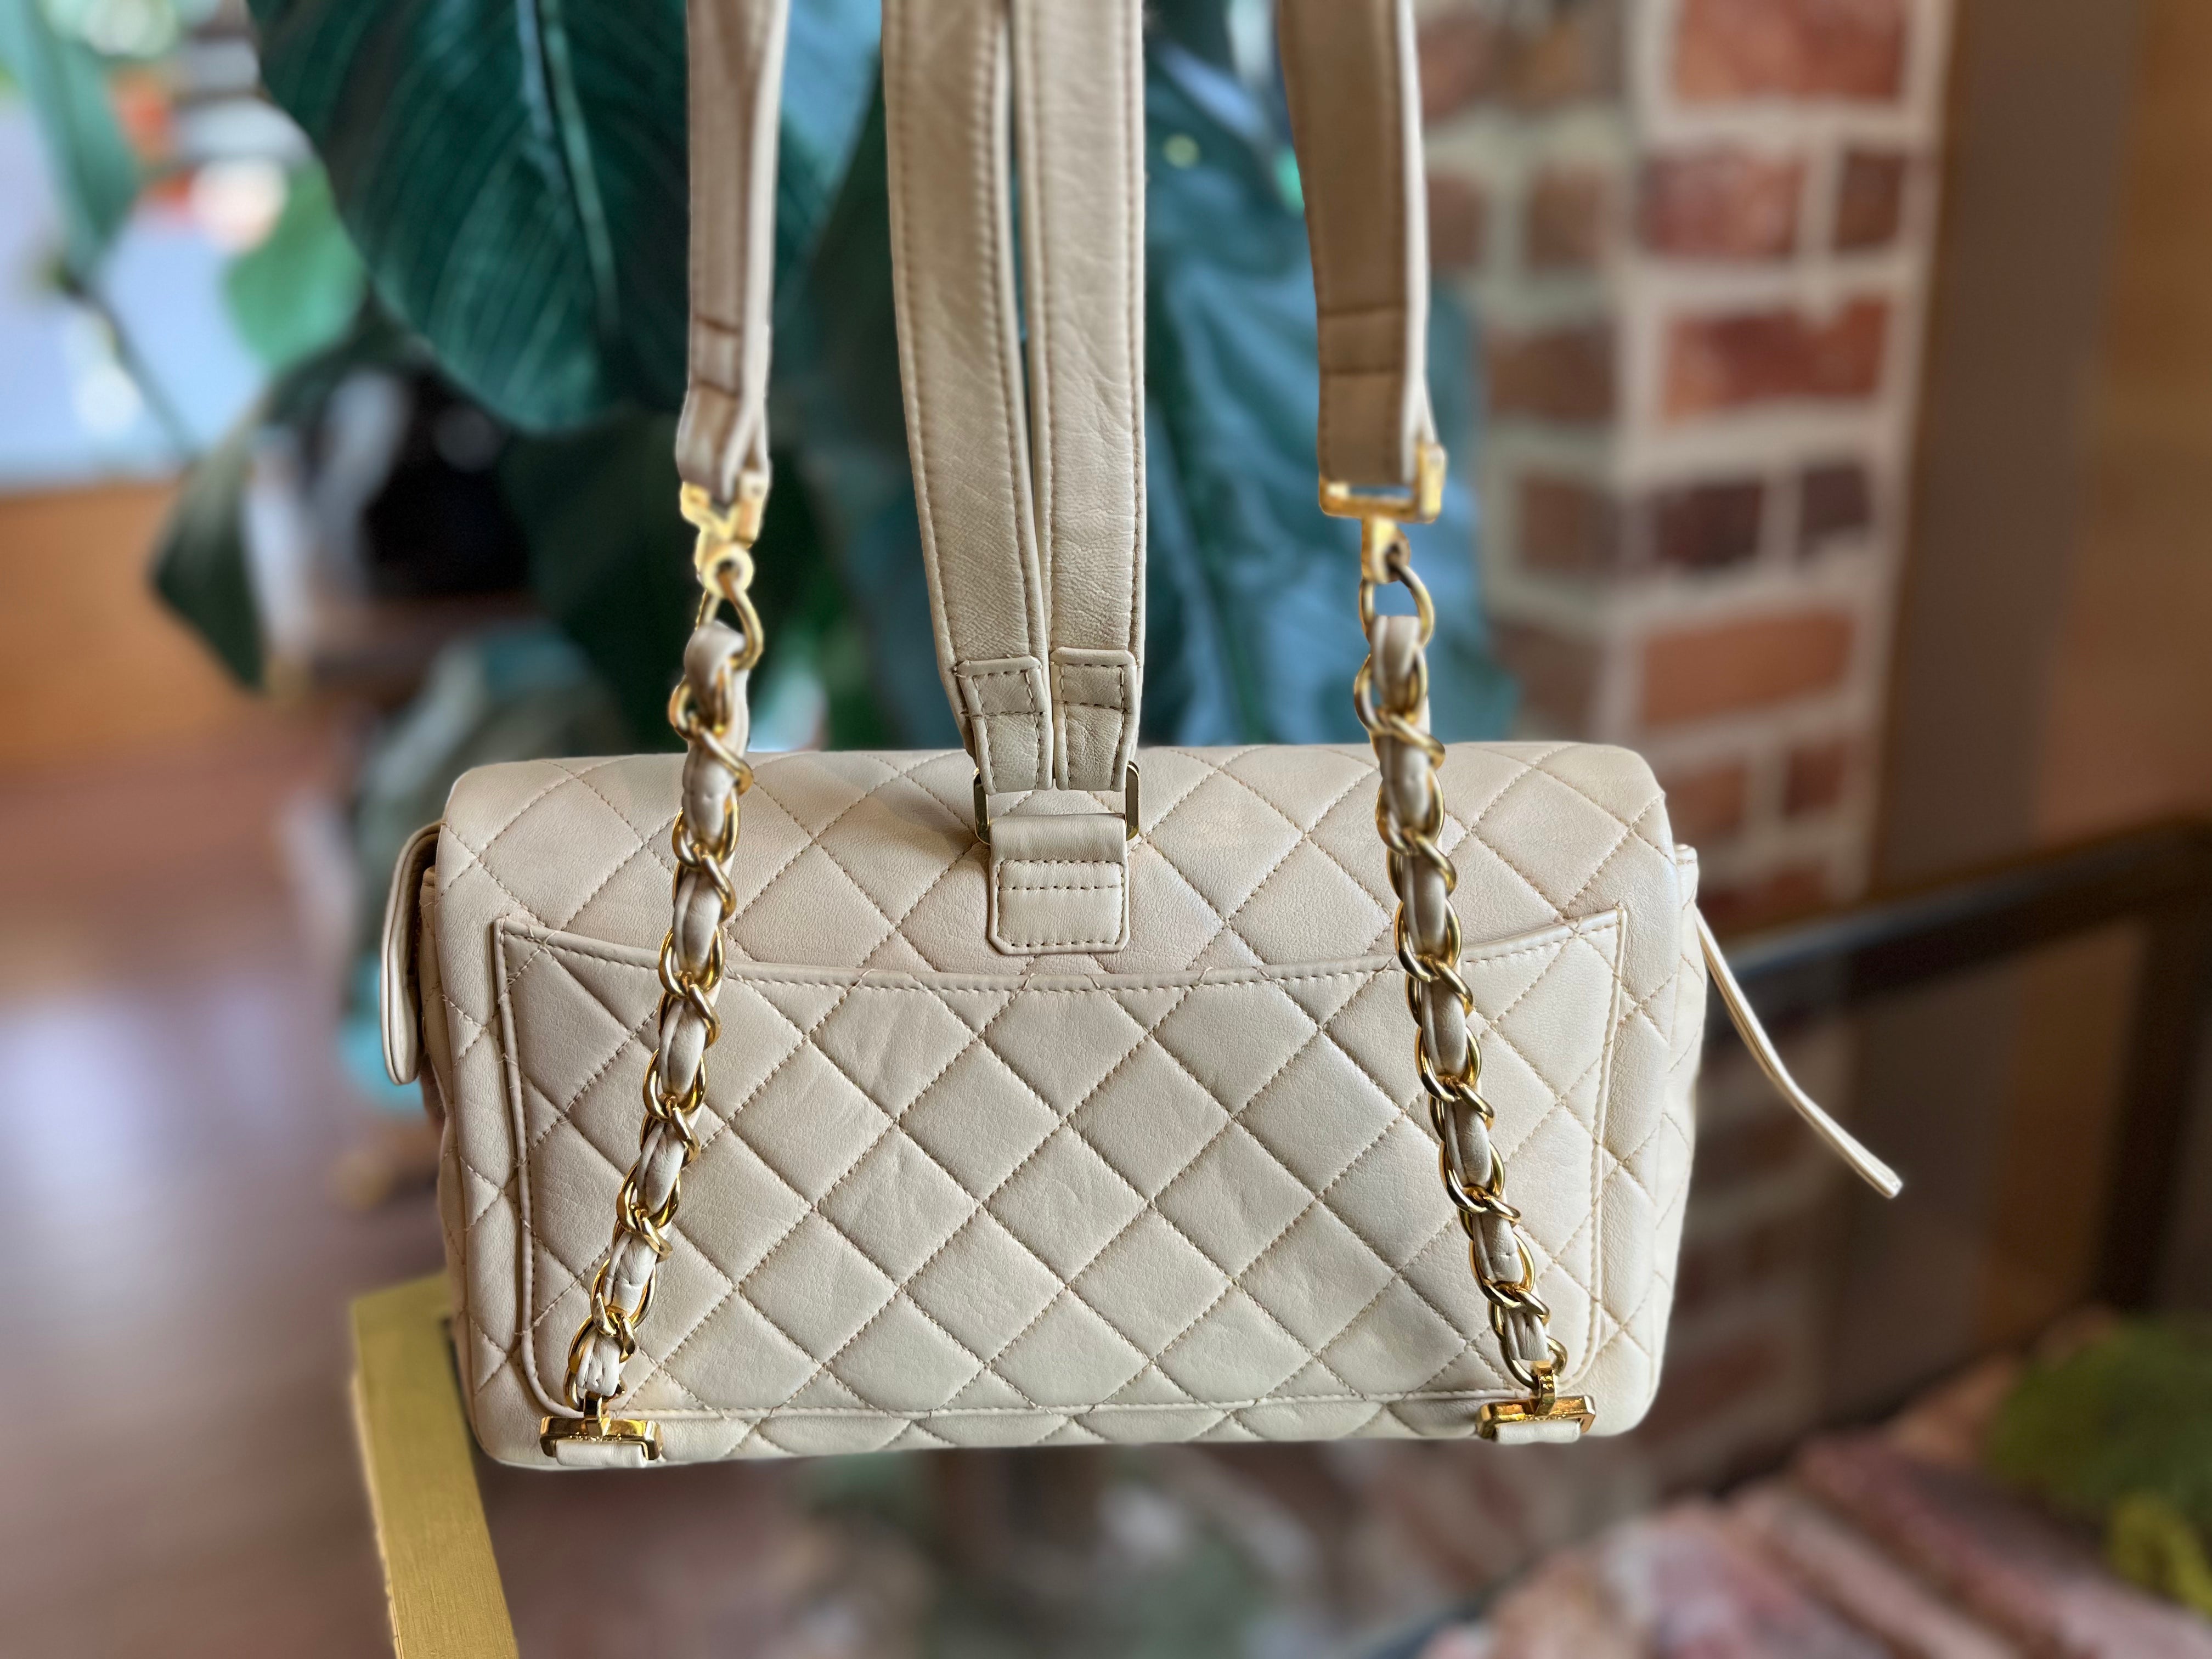 Chanel Beige Leather Gunmetal Chain Quilted Classic Flap Shoulder Bag